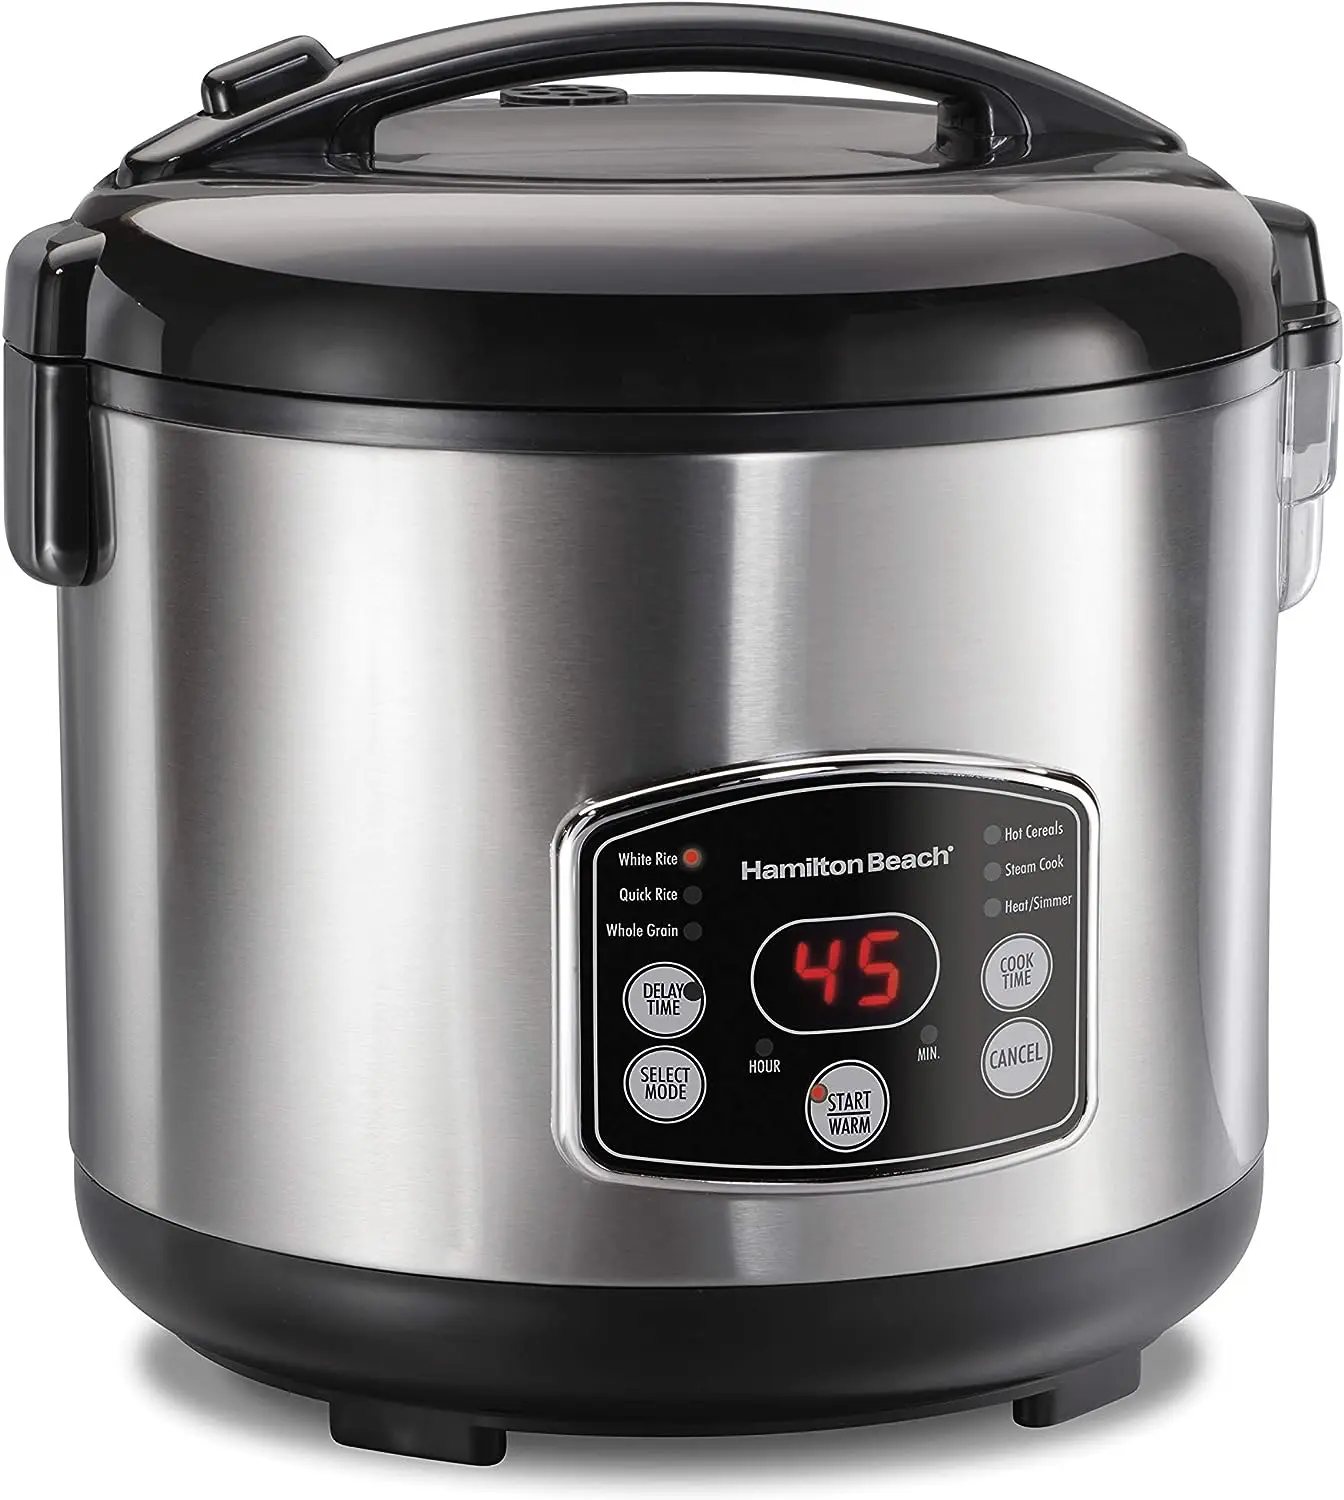 

Digital Programmable Rice Cooker & Food Steamer, 14 Cups Cooked (7 Uncooked) With Steam & Rinse Basket, Stainless Steel